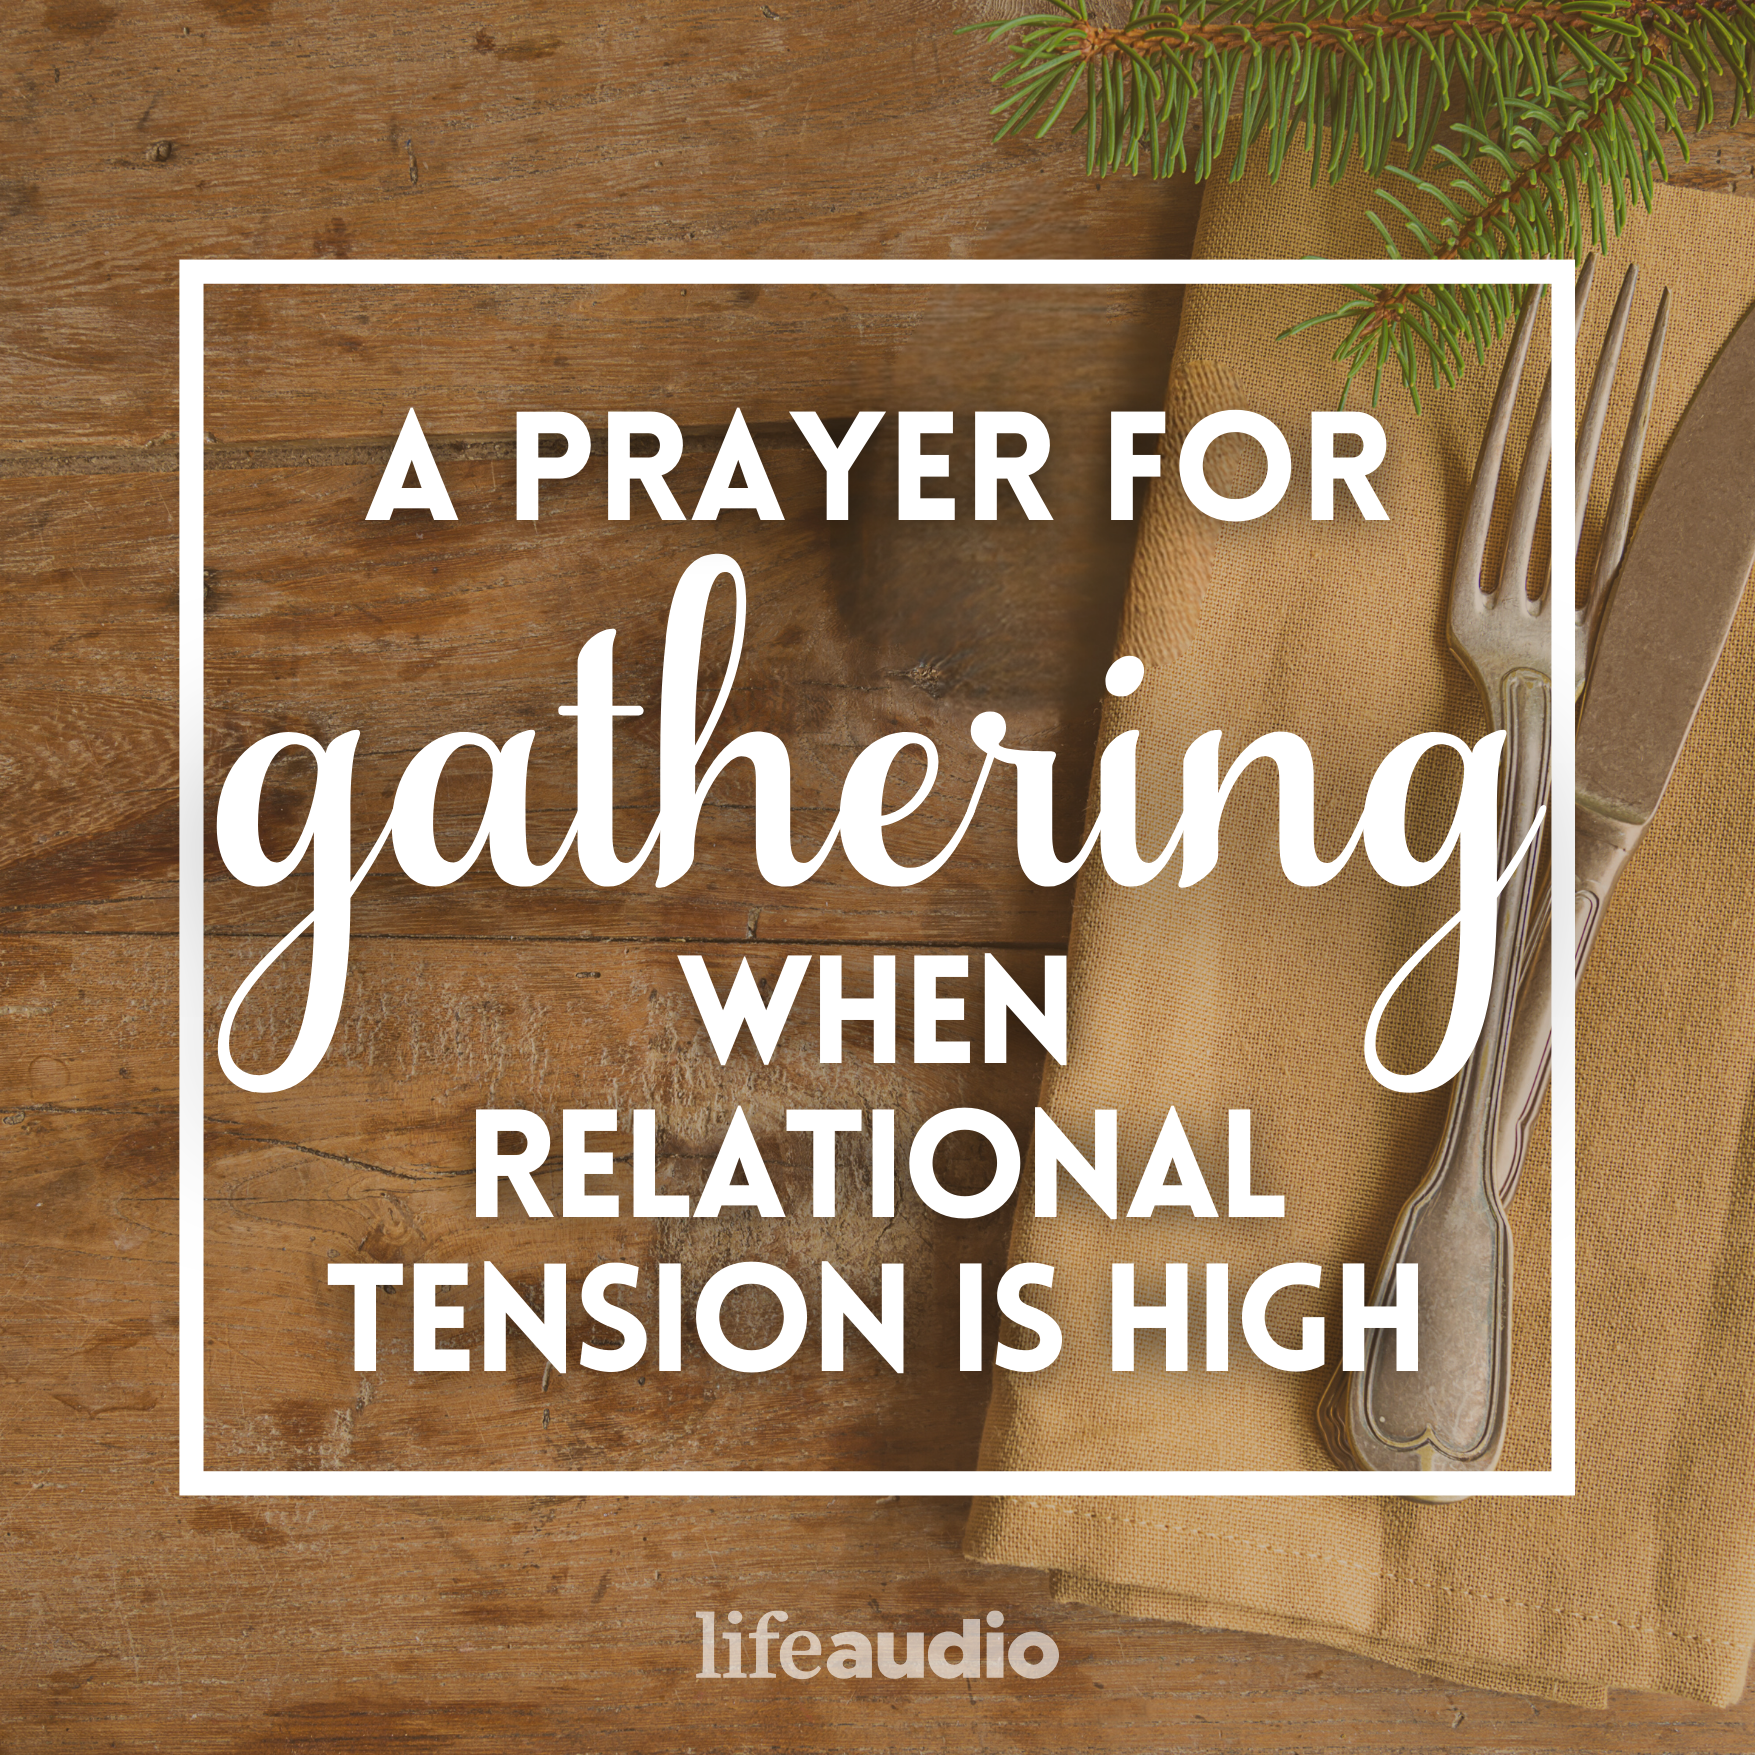 A Prayer for Gathering When Relational Tension is High